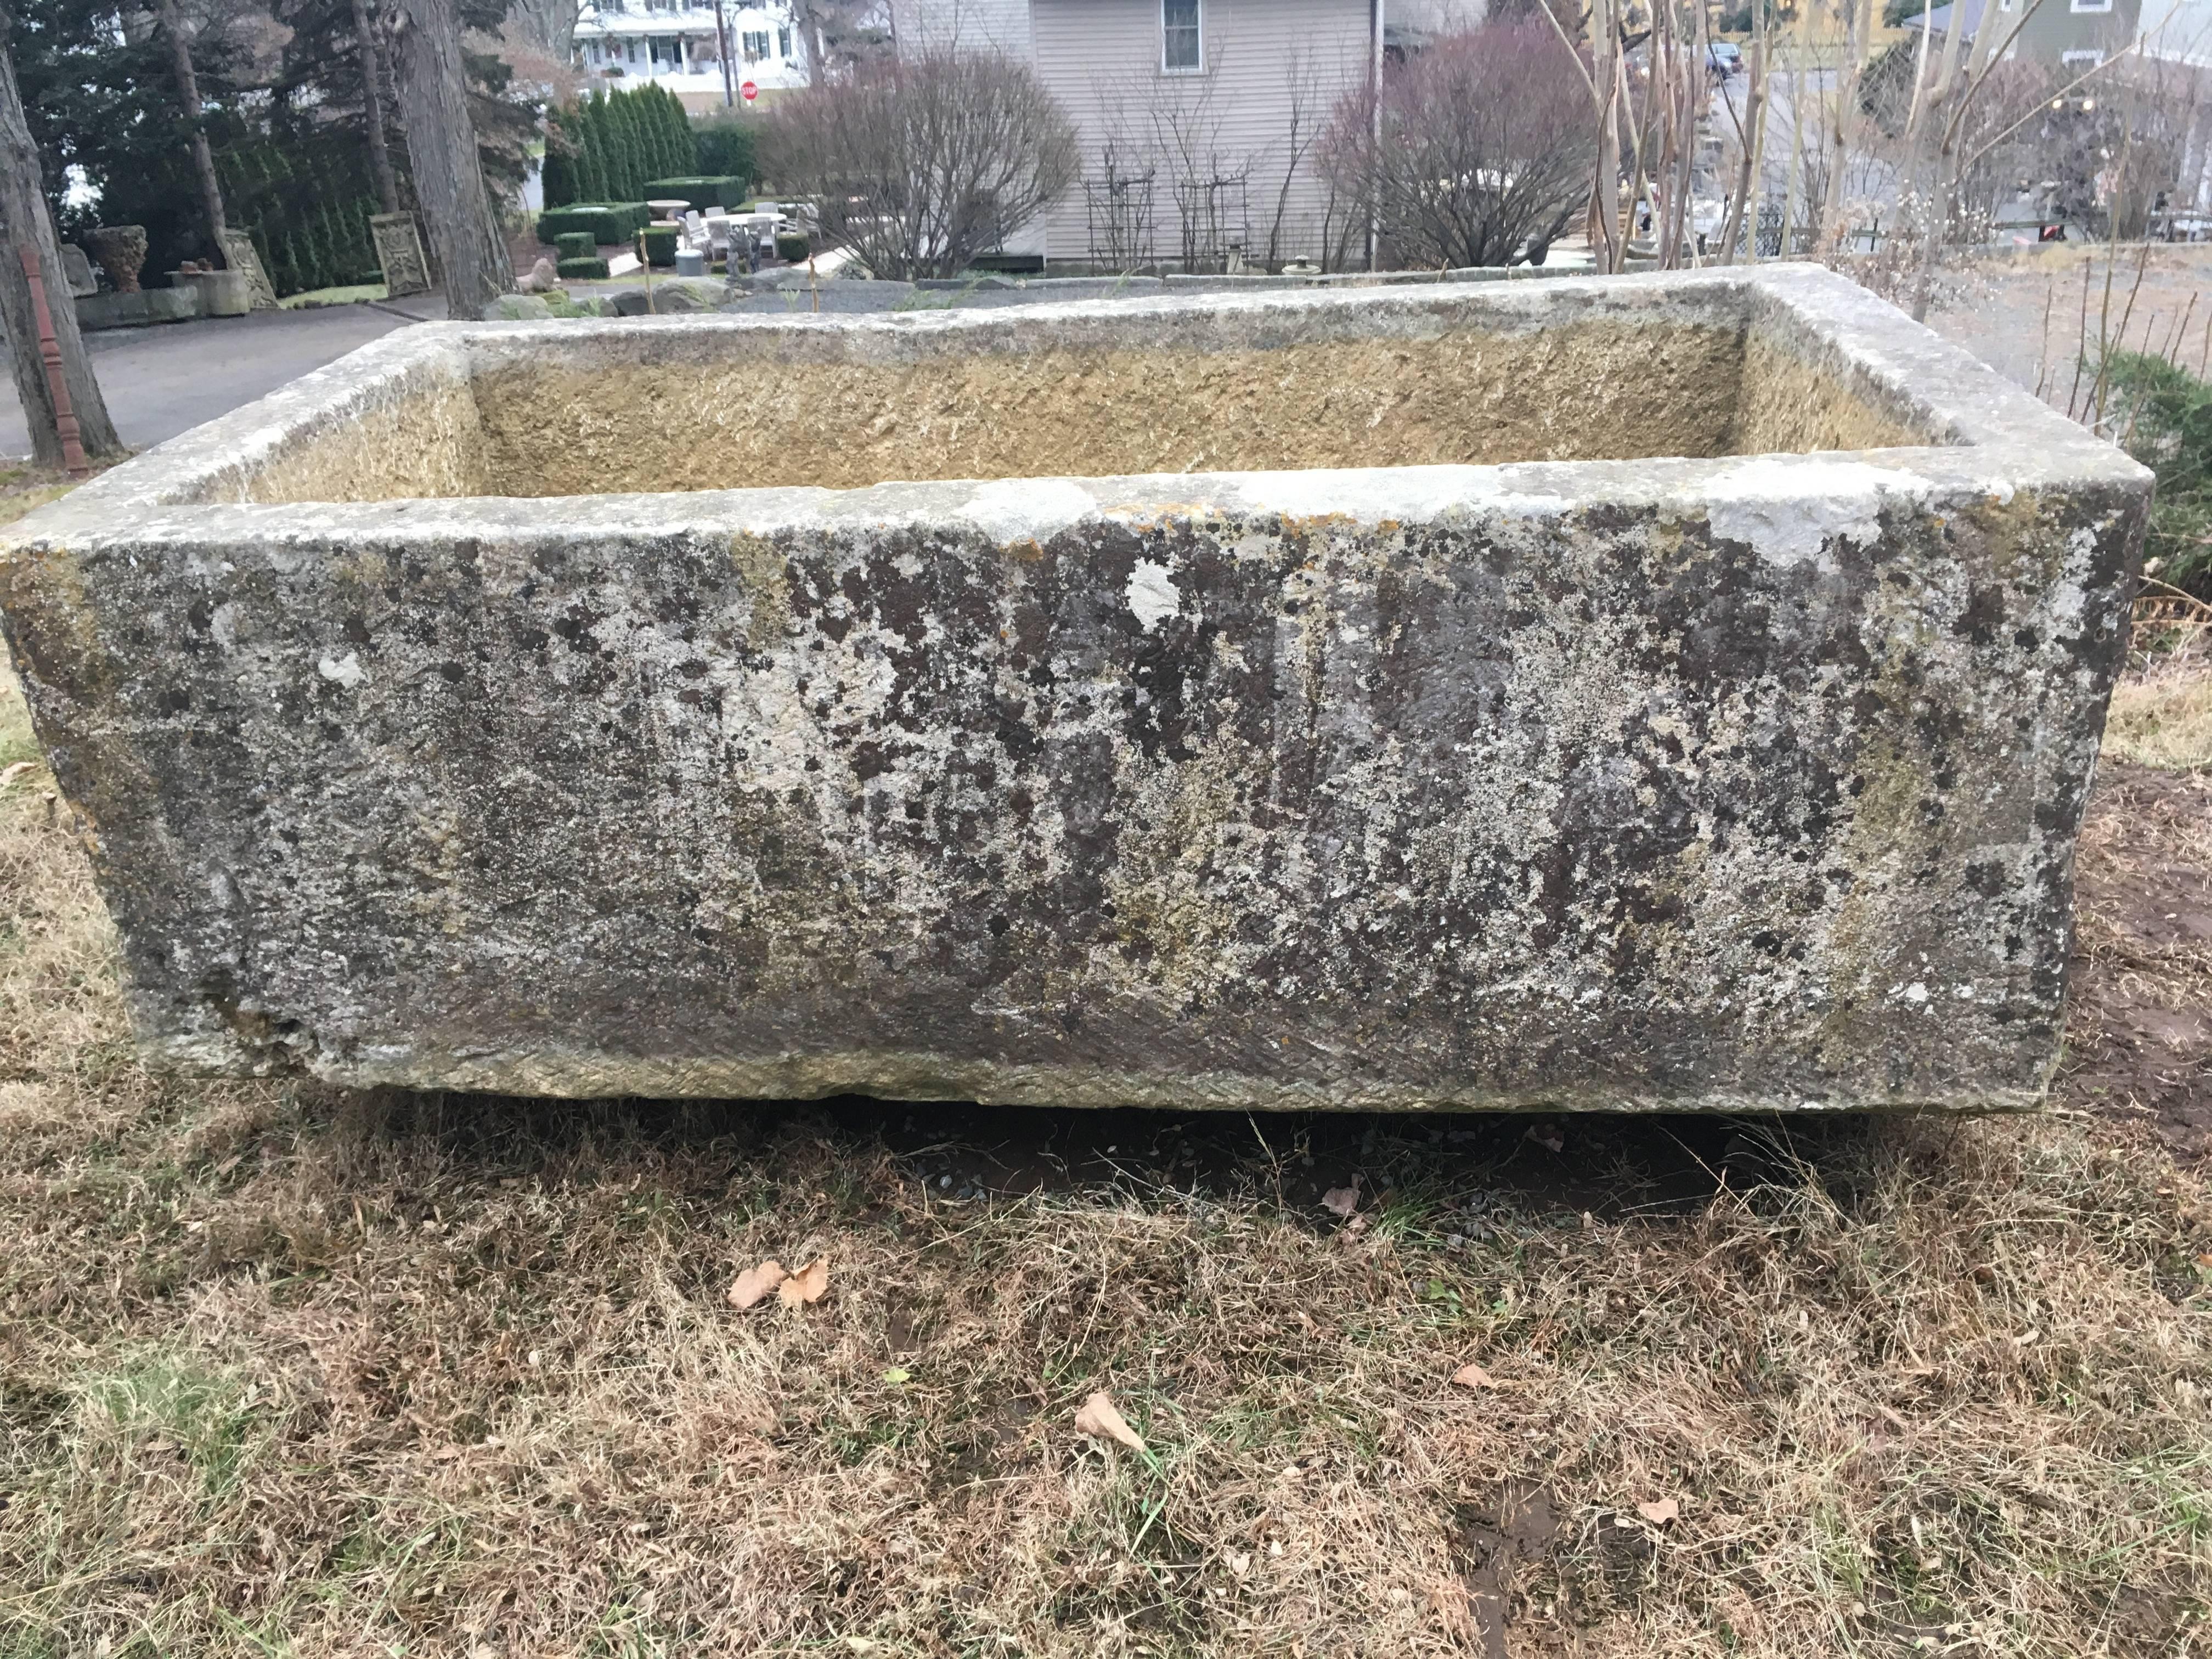 Dating to the late 18th century and hand-carved from a hard limestone, this stunning rectangular trough is superb in all respects: size, patina, condition, and age. It would make the perfect wall fountain, or look equally well with a profuse